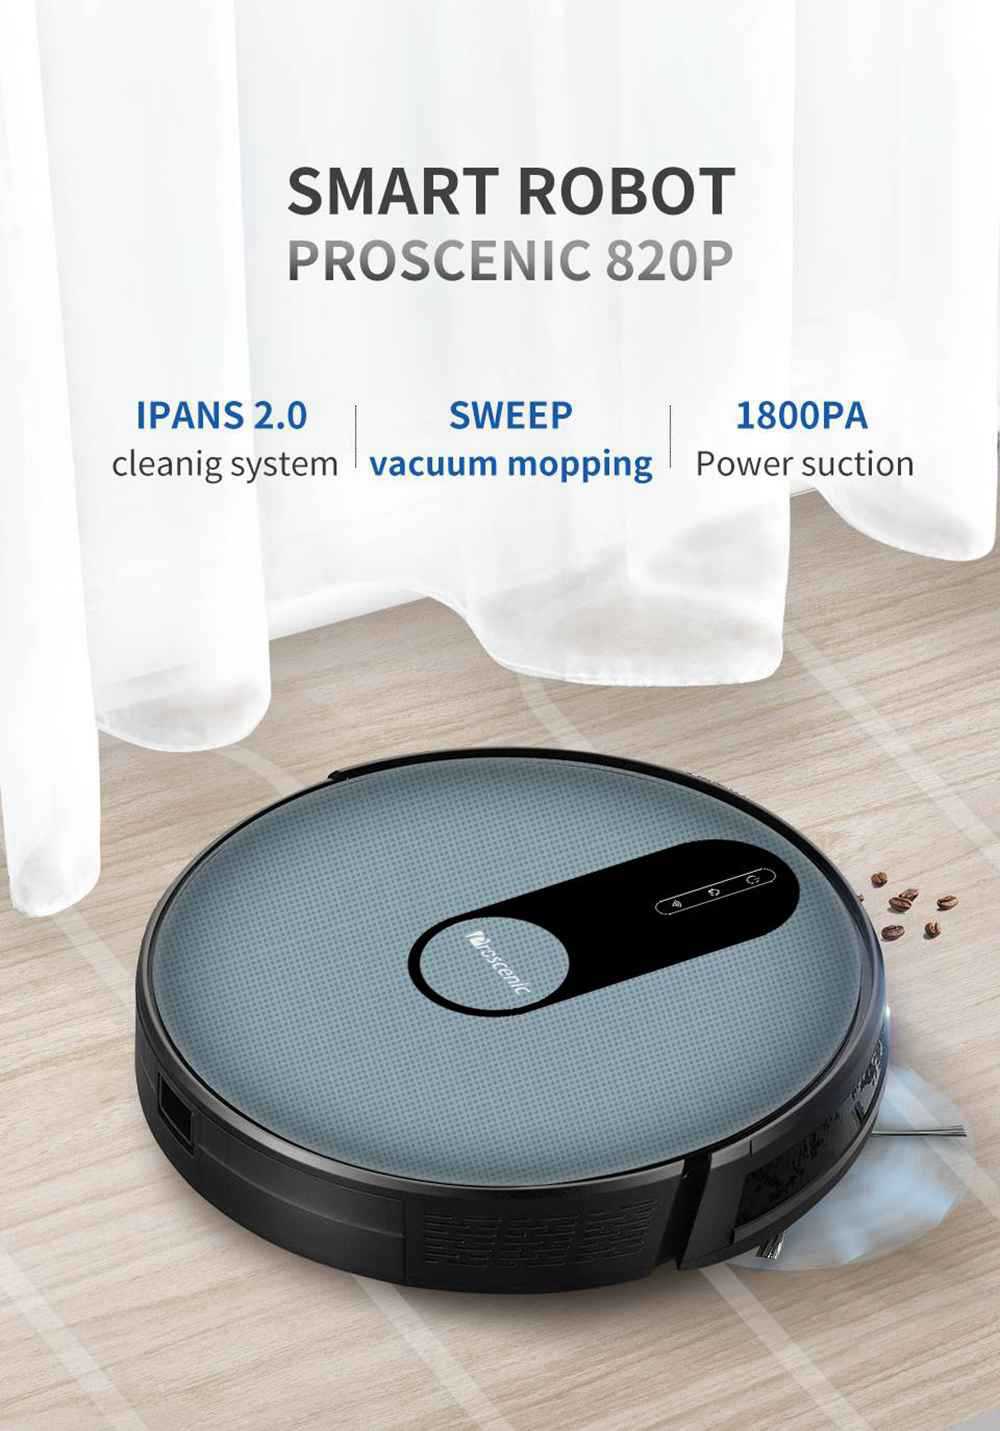 Proscenic 820P Robot Vacuum Cleaner 1800Pa Strong Suction Alexa and APP Control with Wet Cleaning Function - Black